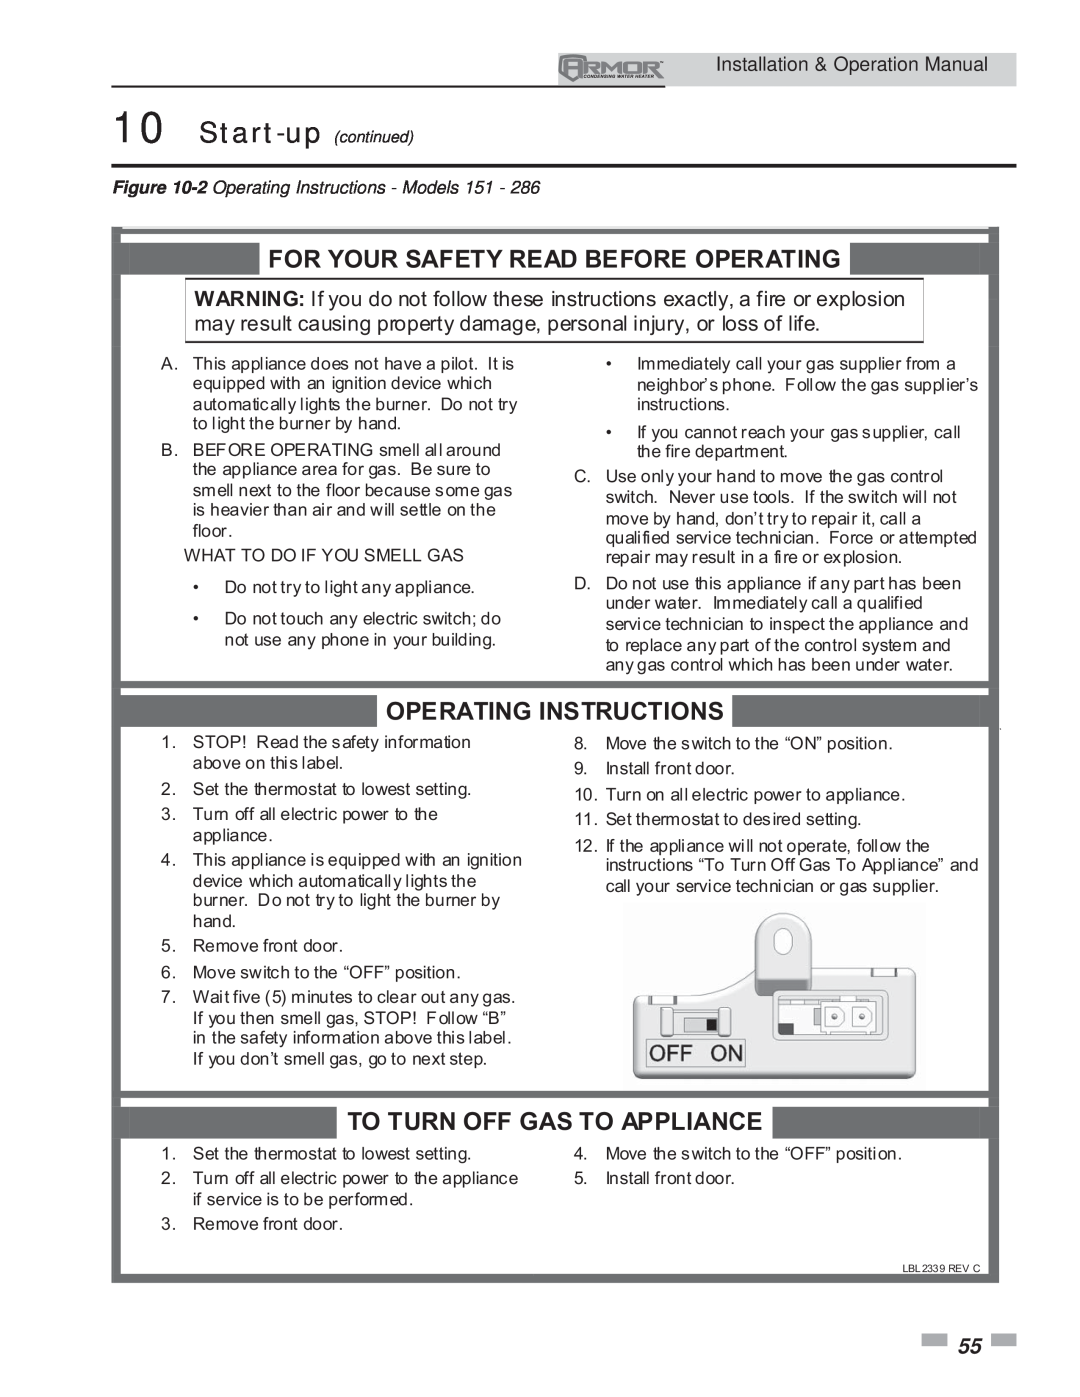 Lochinvar 151 operation manual For Your Safety Read Before Operating, Operating Instructions, To Turn Off Gas To Appliance 